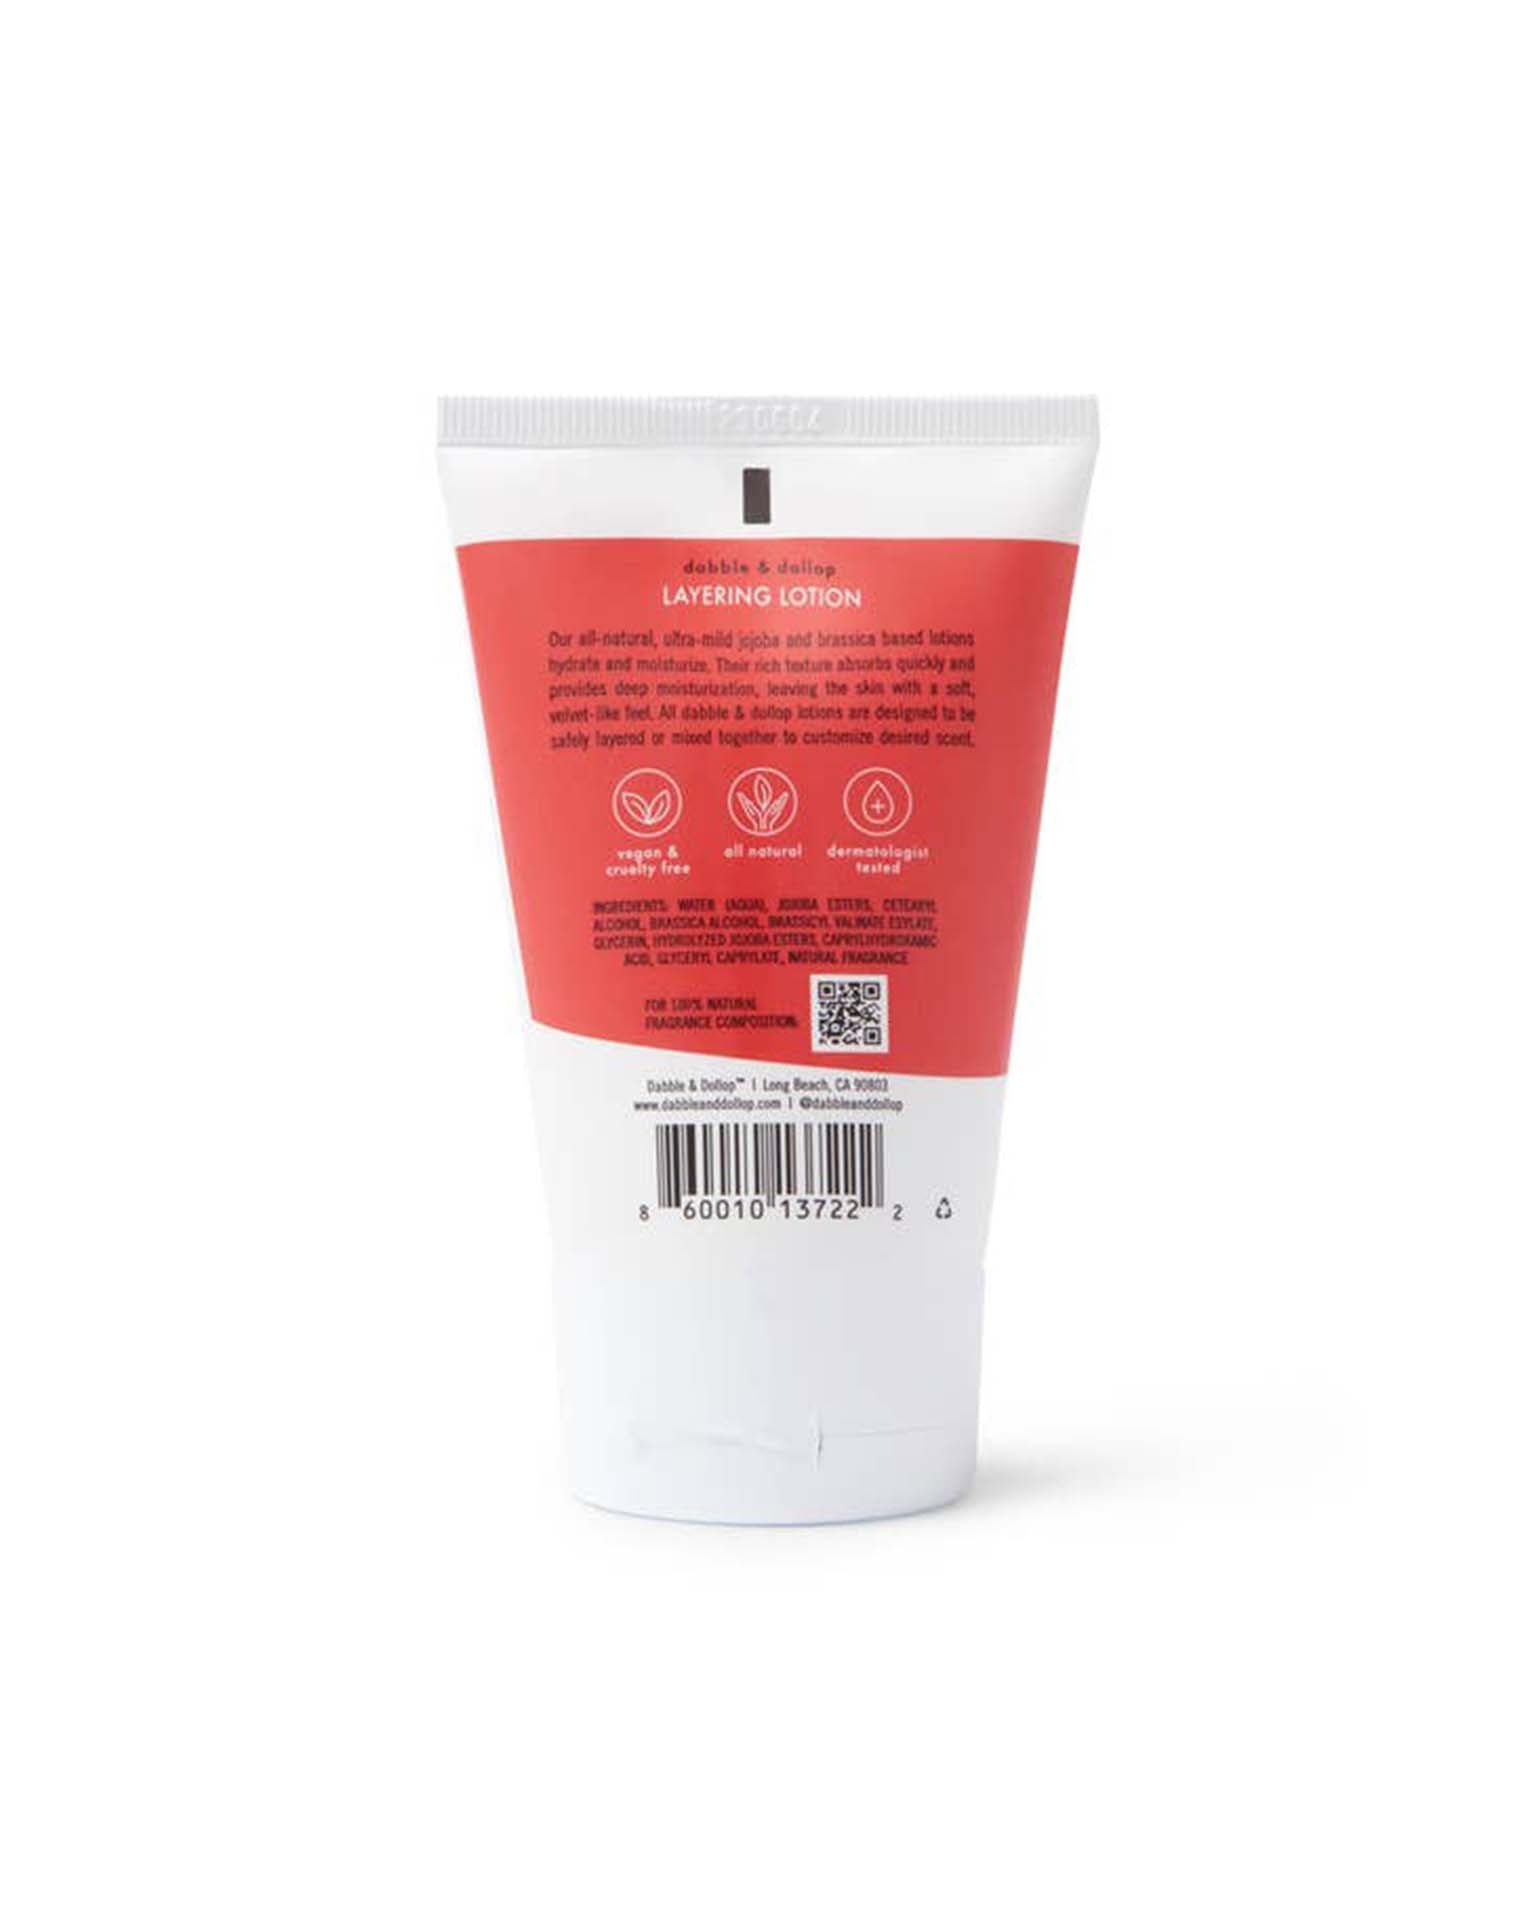 Little dabble + dollop room all natural layering lotion in strawberry